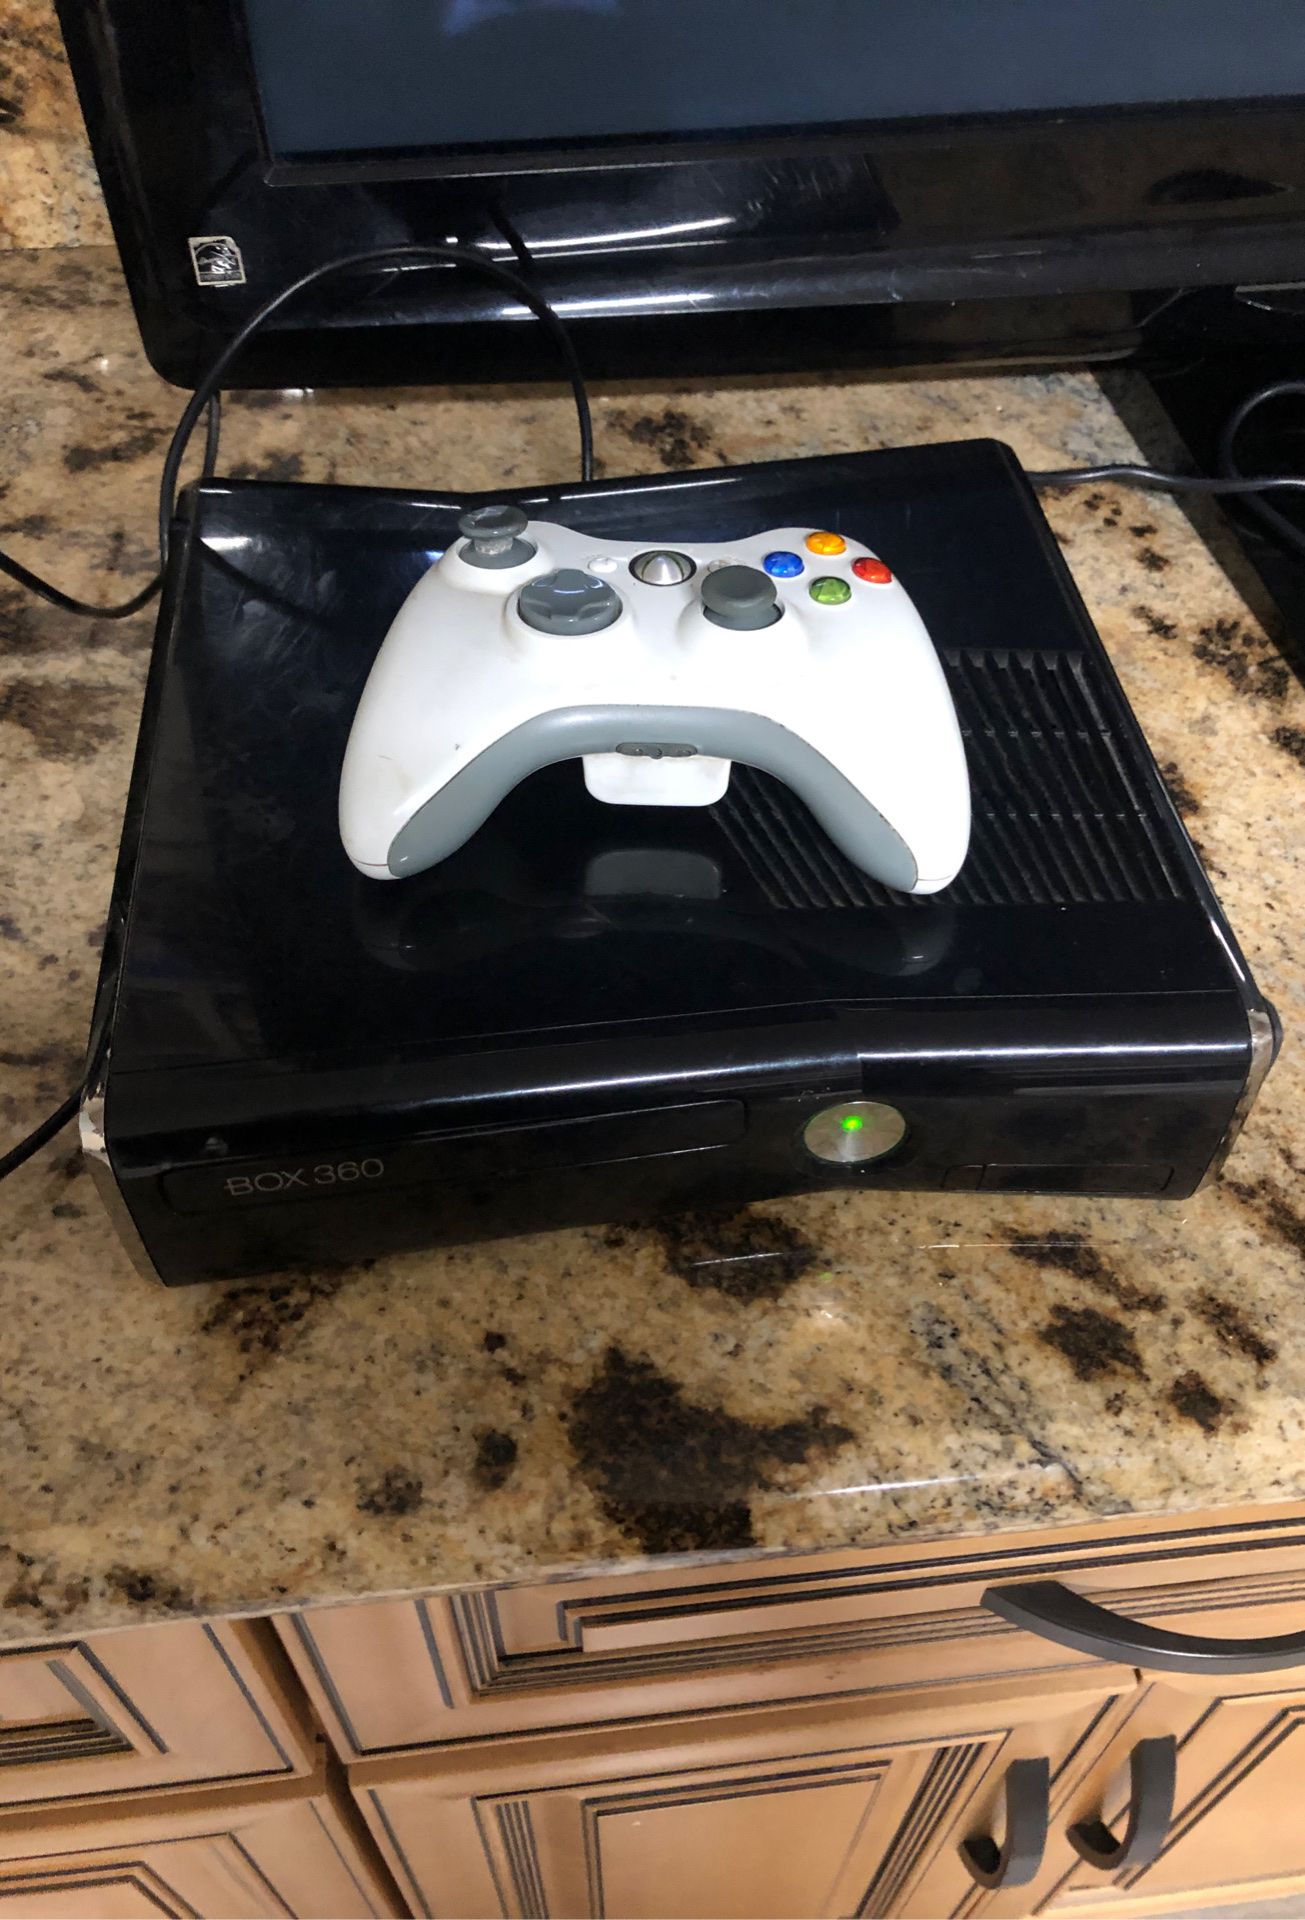 Xbox 360 with controller and a few games